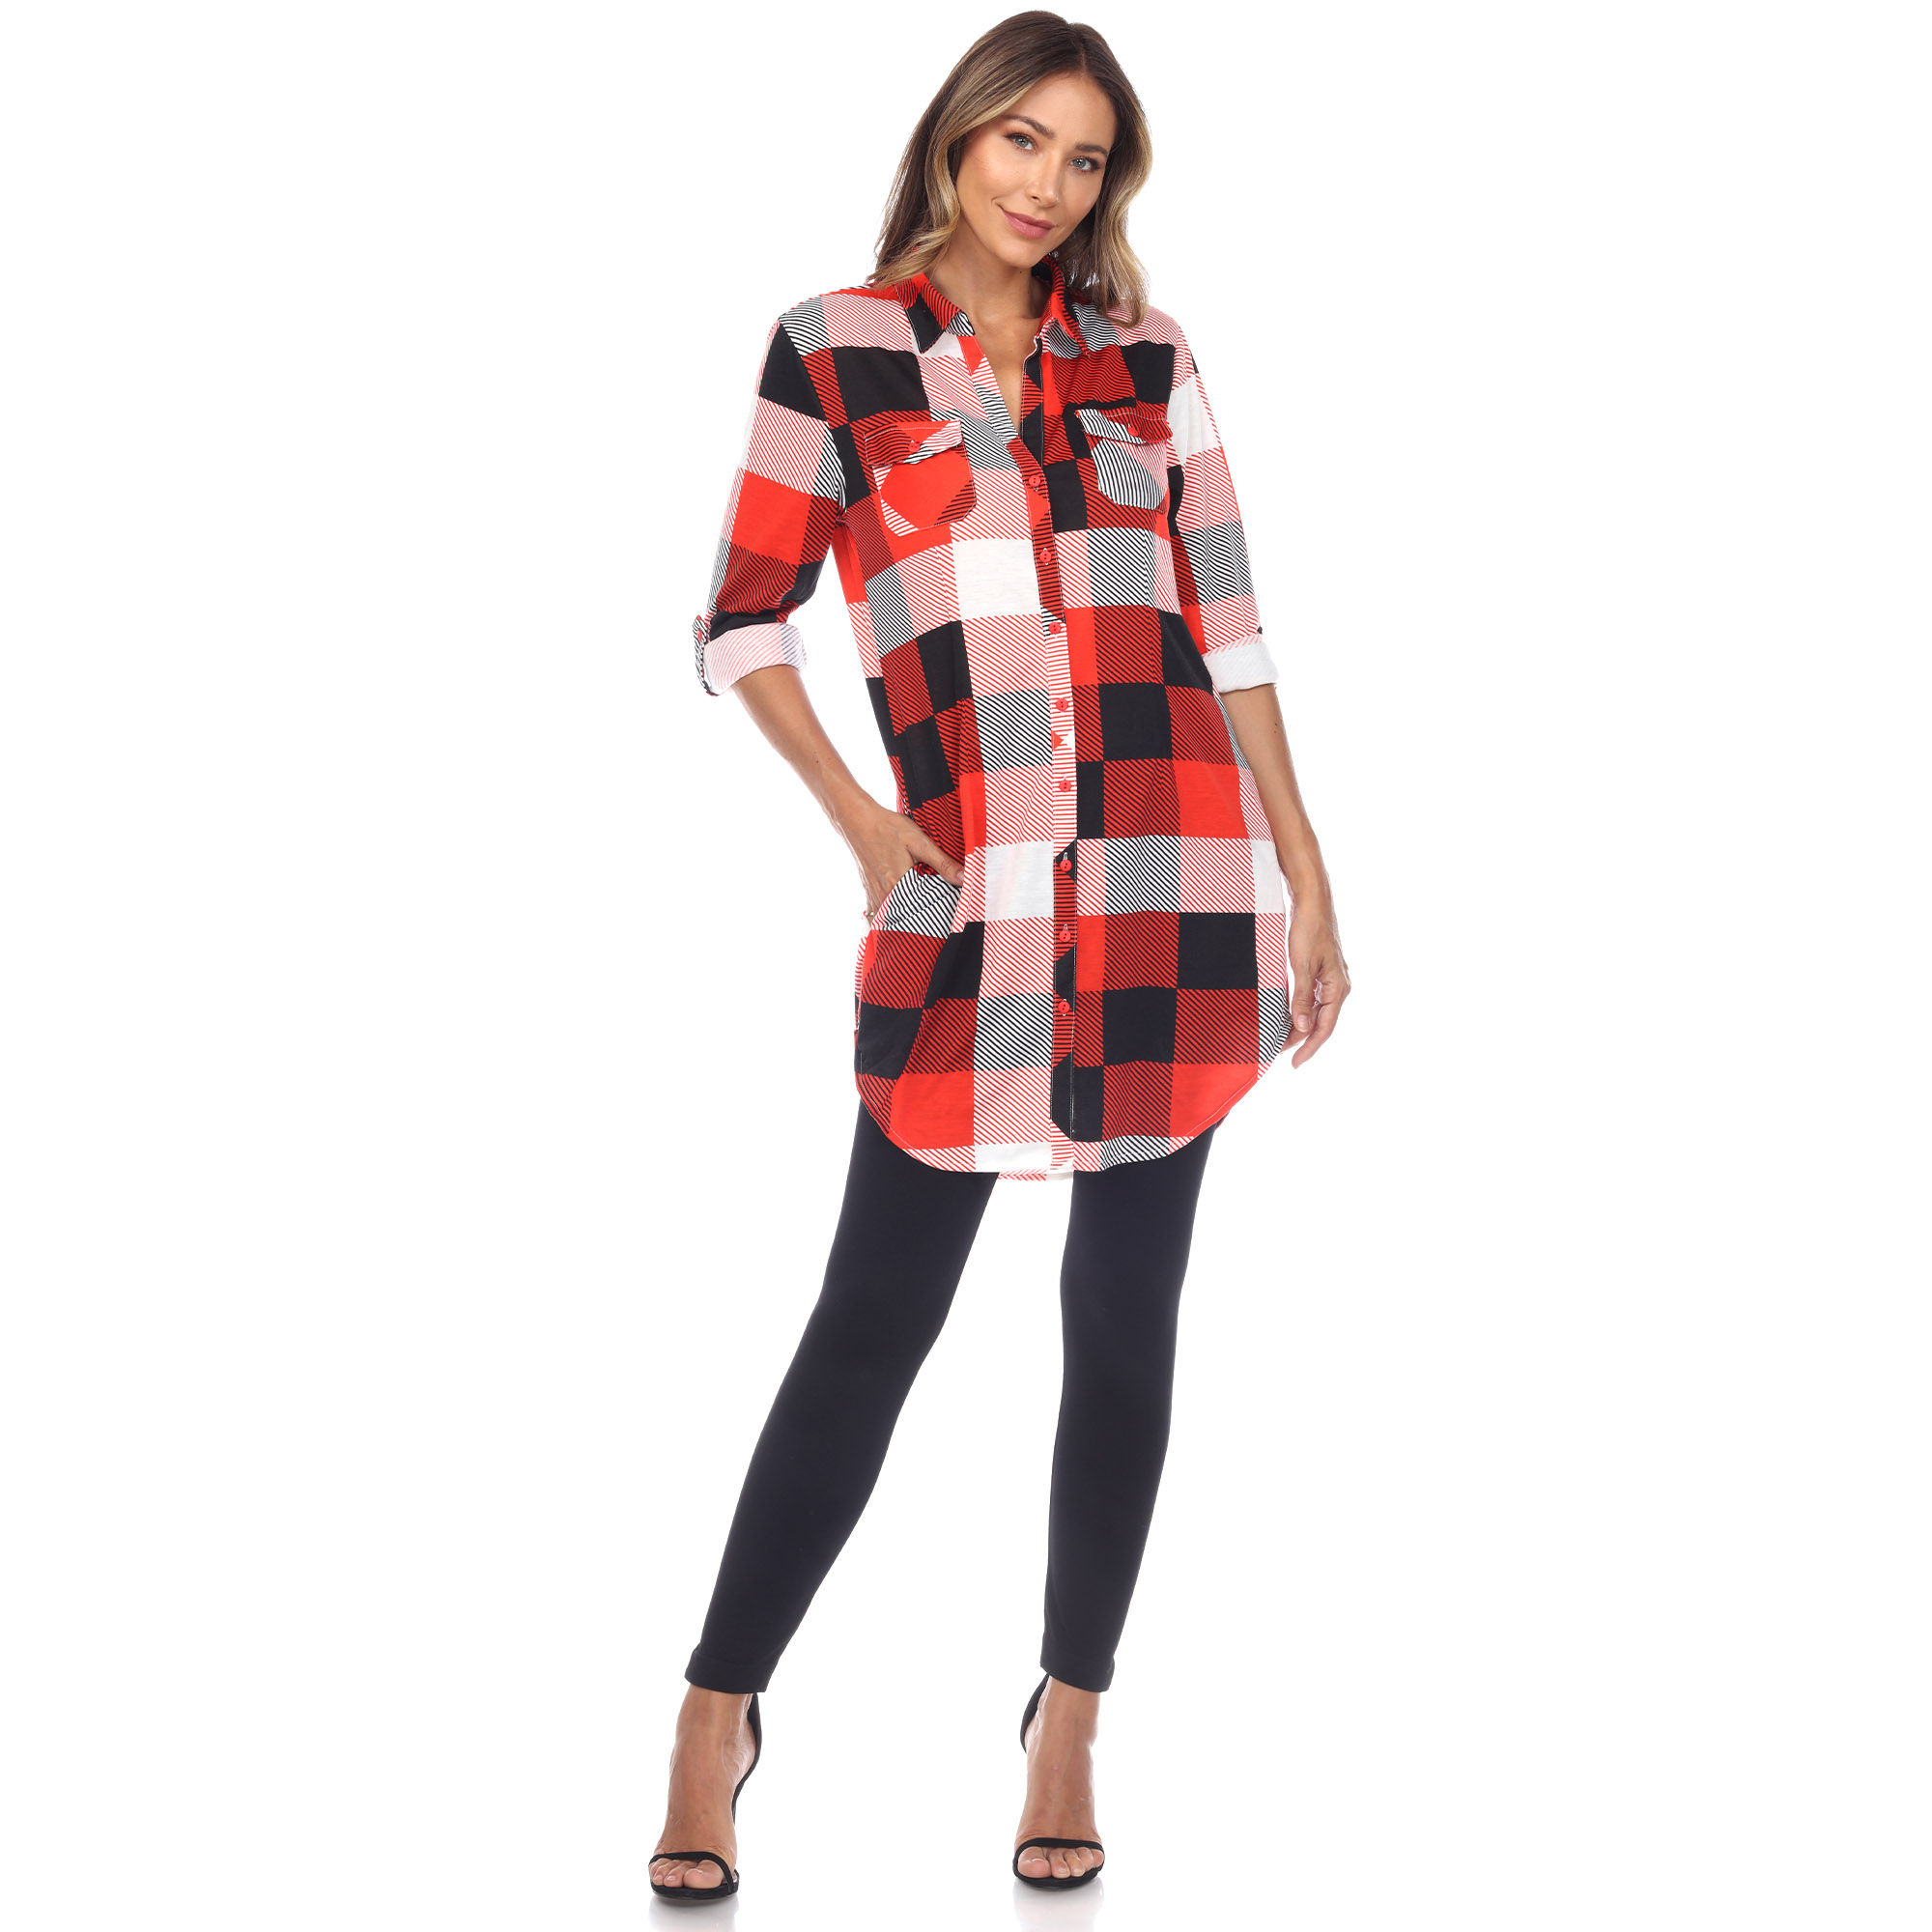 White Mark Women's Stretchy Buffalo Plaid Tunic Top - Blue/Brown, X-Large